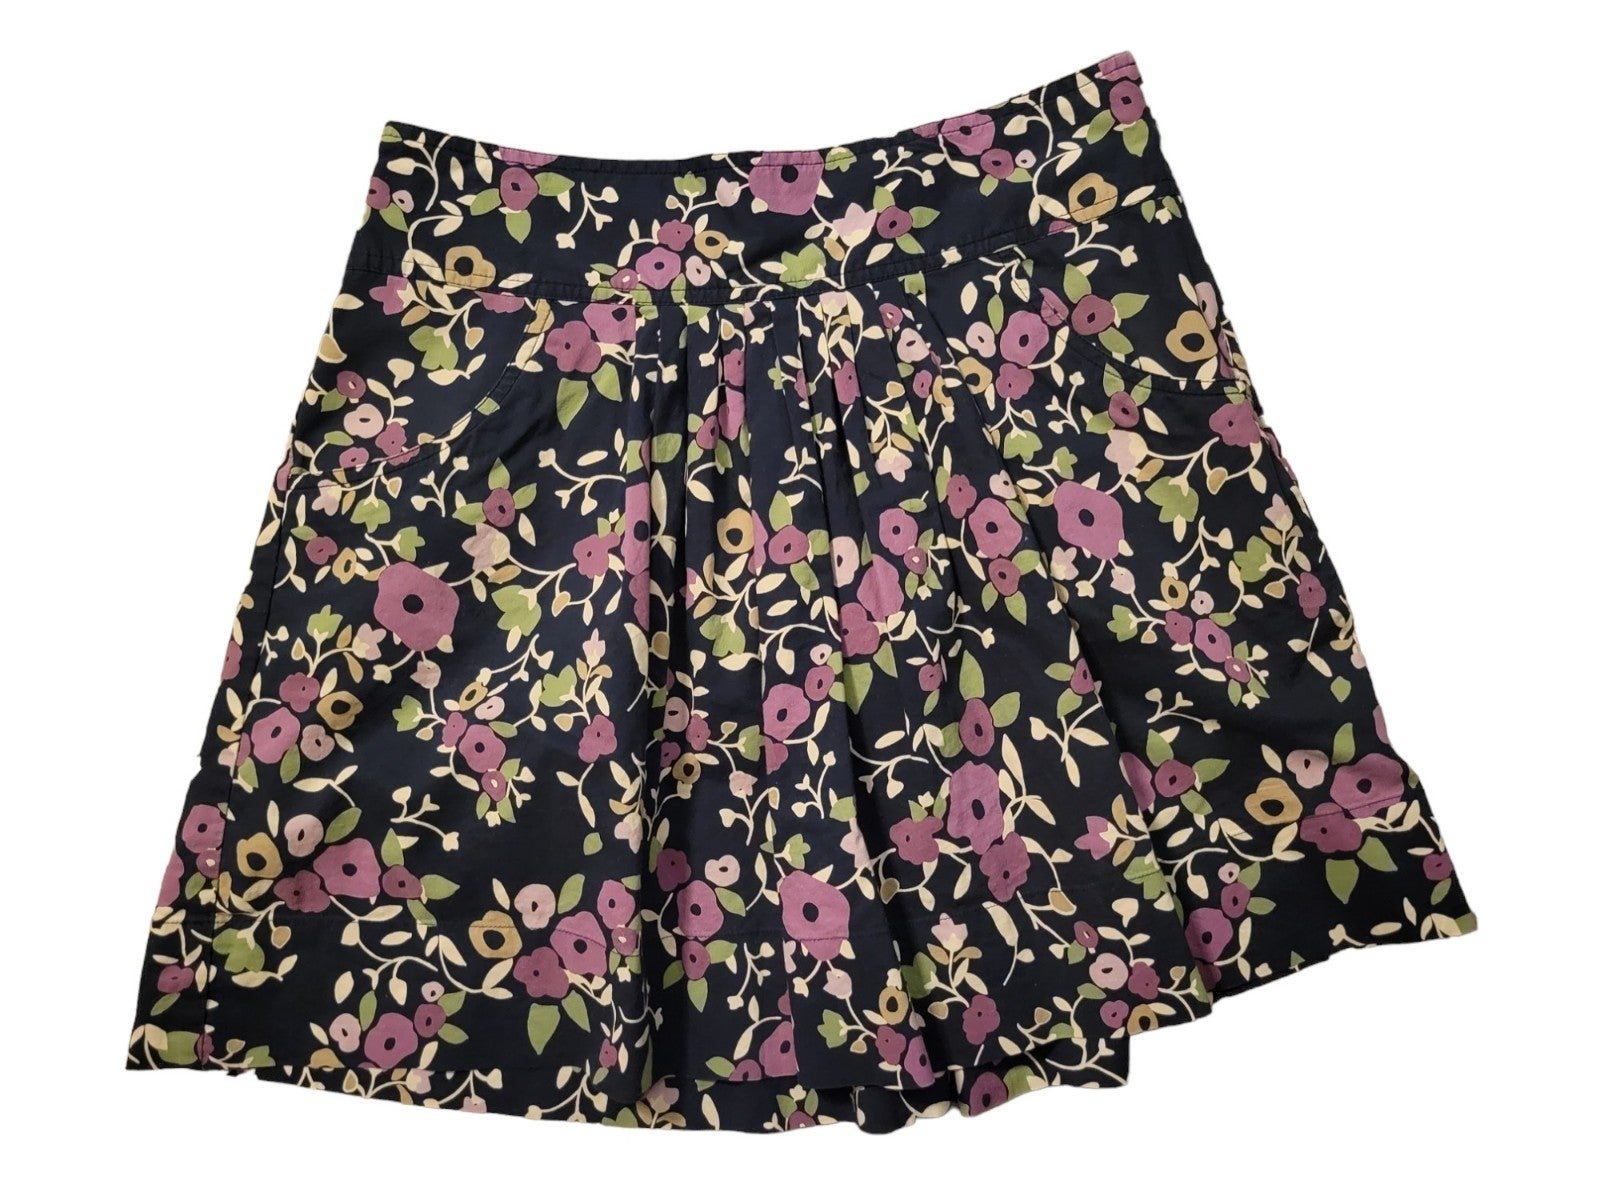 Cheap Ann Taylor Loft Womens Floral Print Pleated Tennis Skirt with Pockets Size 0 Med37r3tB outlet online shop